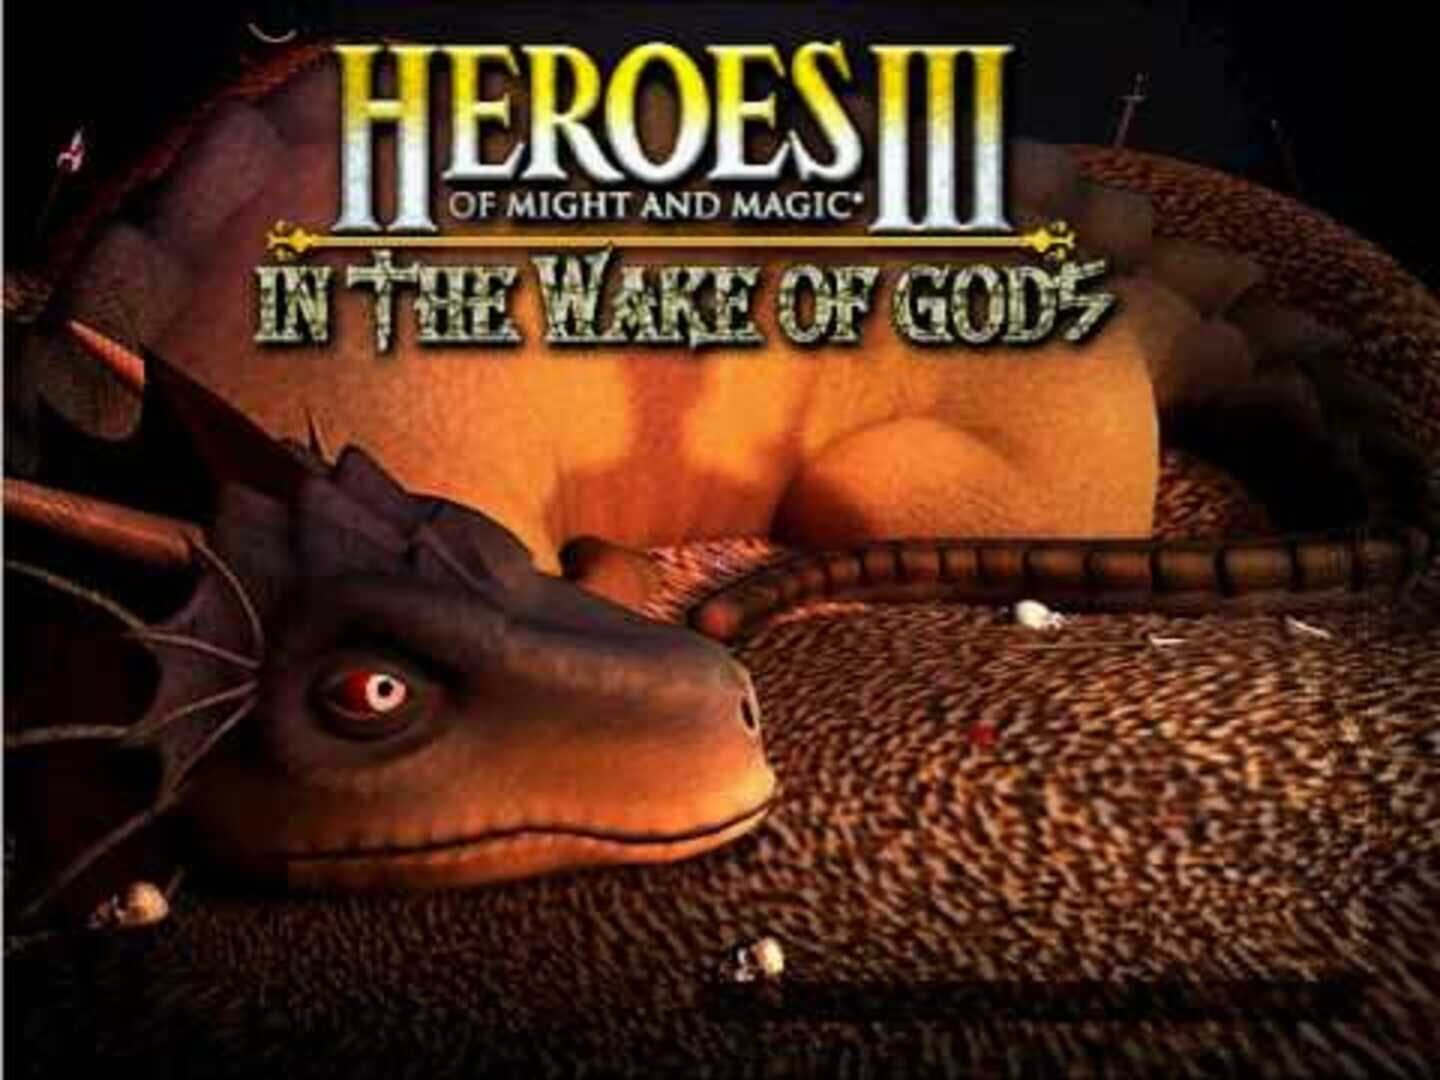 Heroes of might and magic 3 wog. Герои меча и магии 3 in the Wake of Gods. Heroes of might and Magic 3. Heroes of might and Magic 3.5. Heroes of might and Magic 3 Wake of Gods.